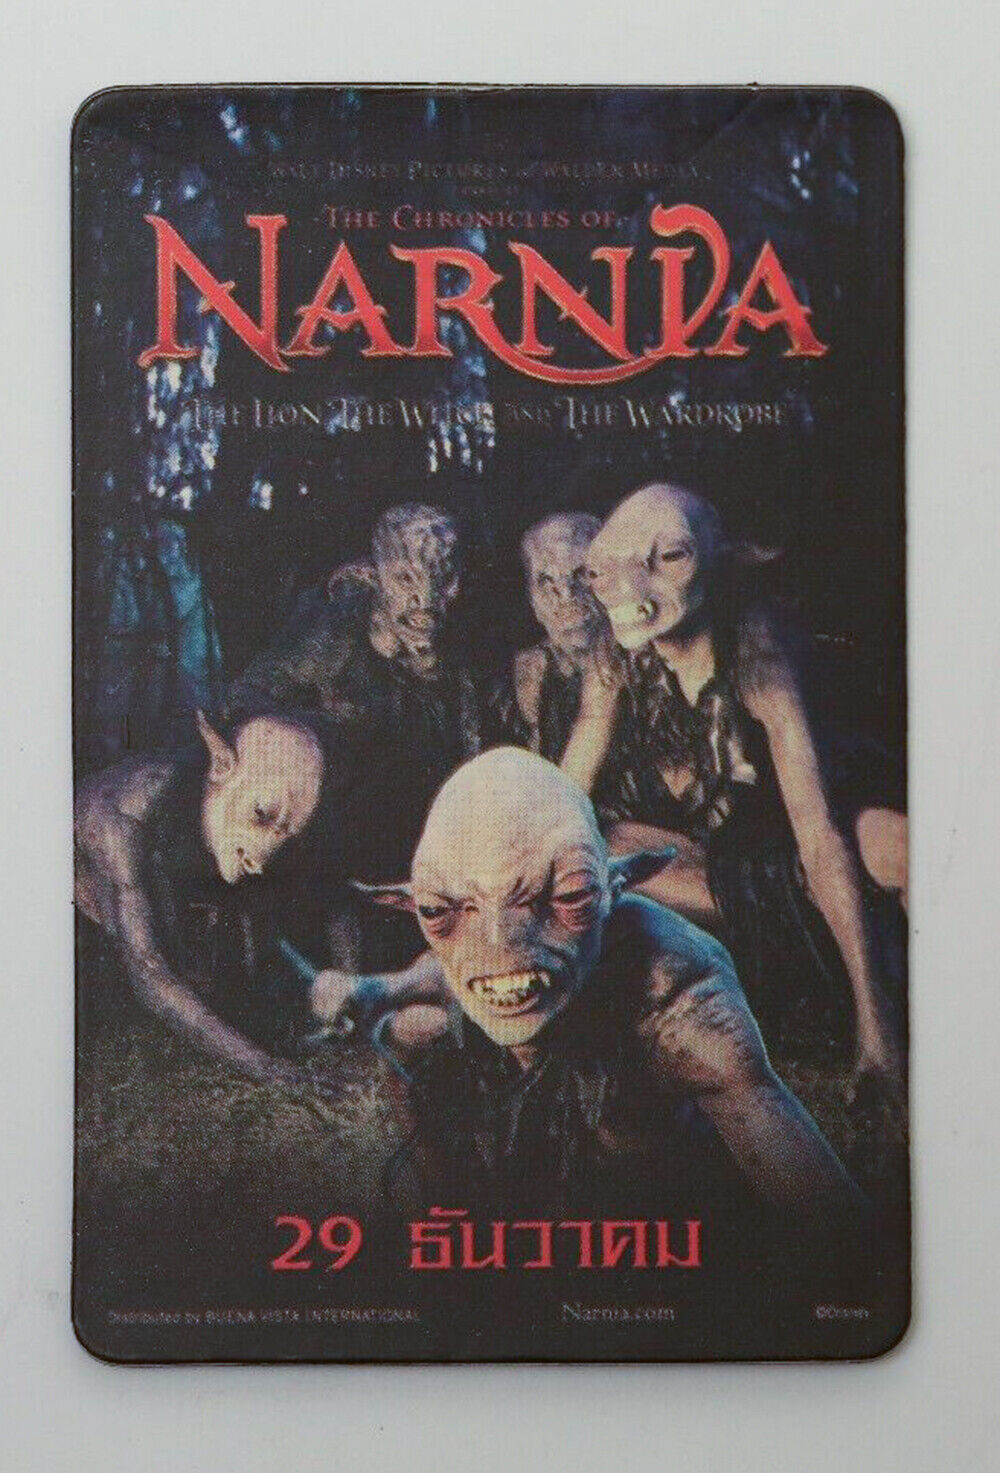 NARNIA Monster movie poster Design Magnet Fridge Collectible